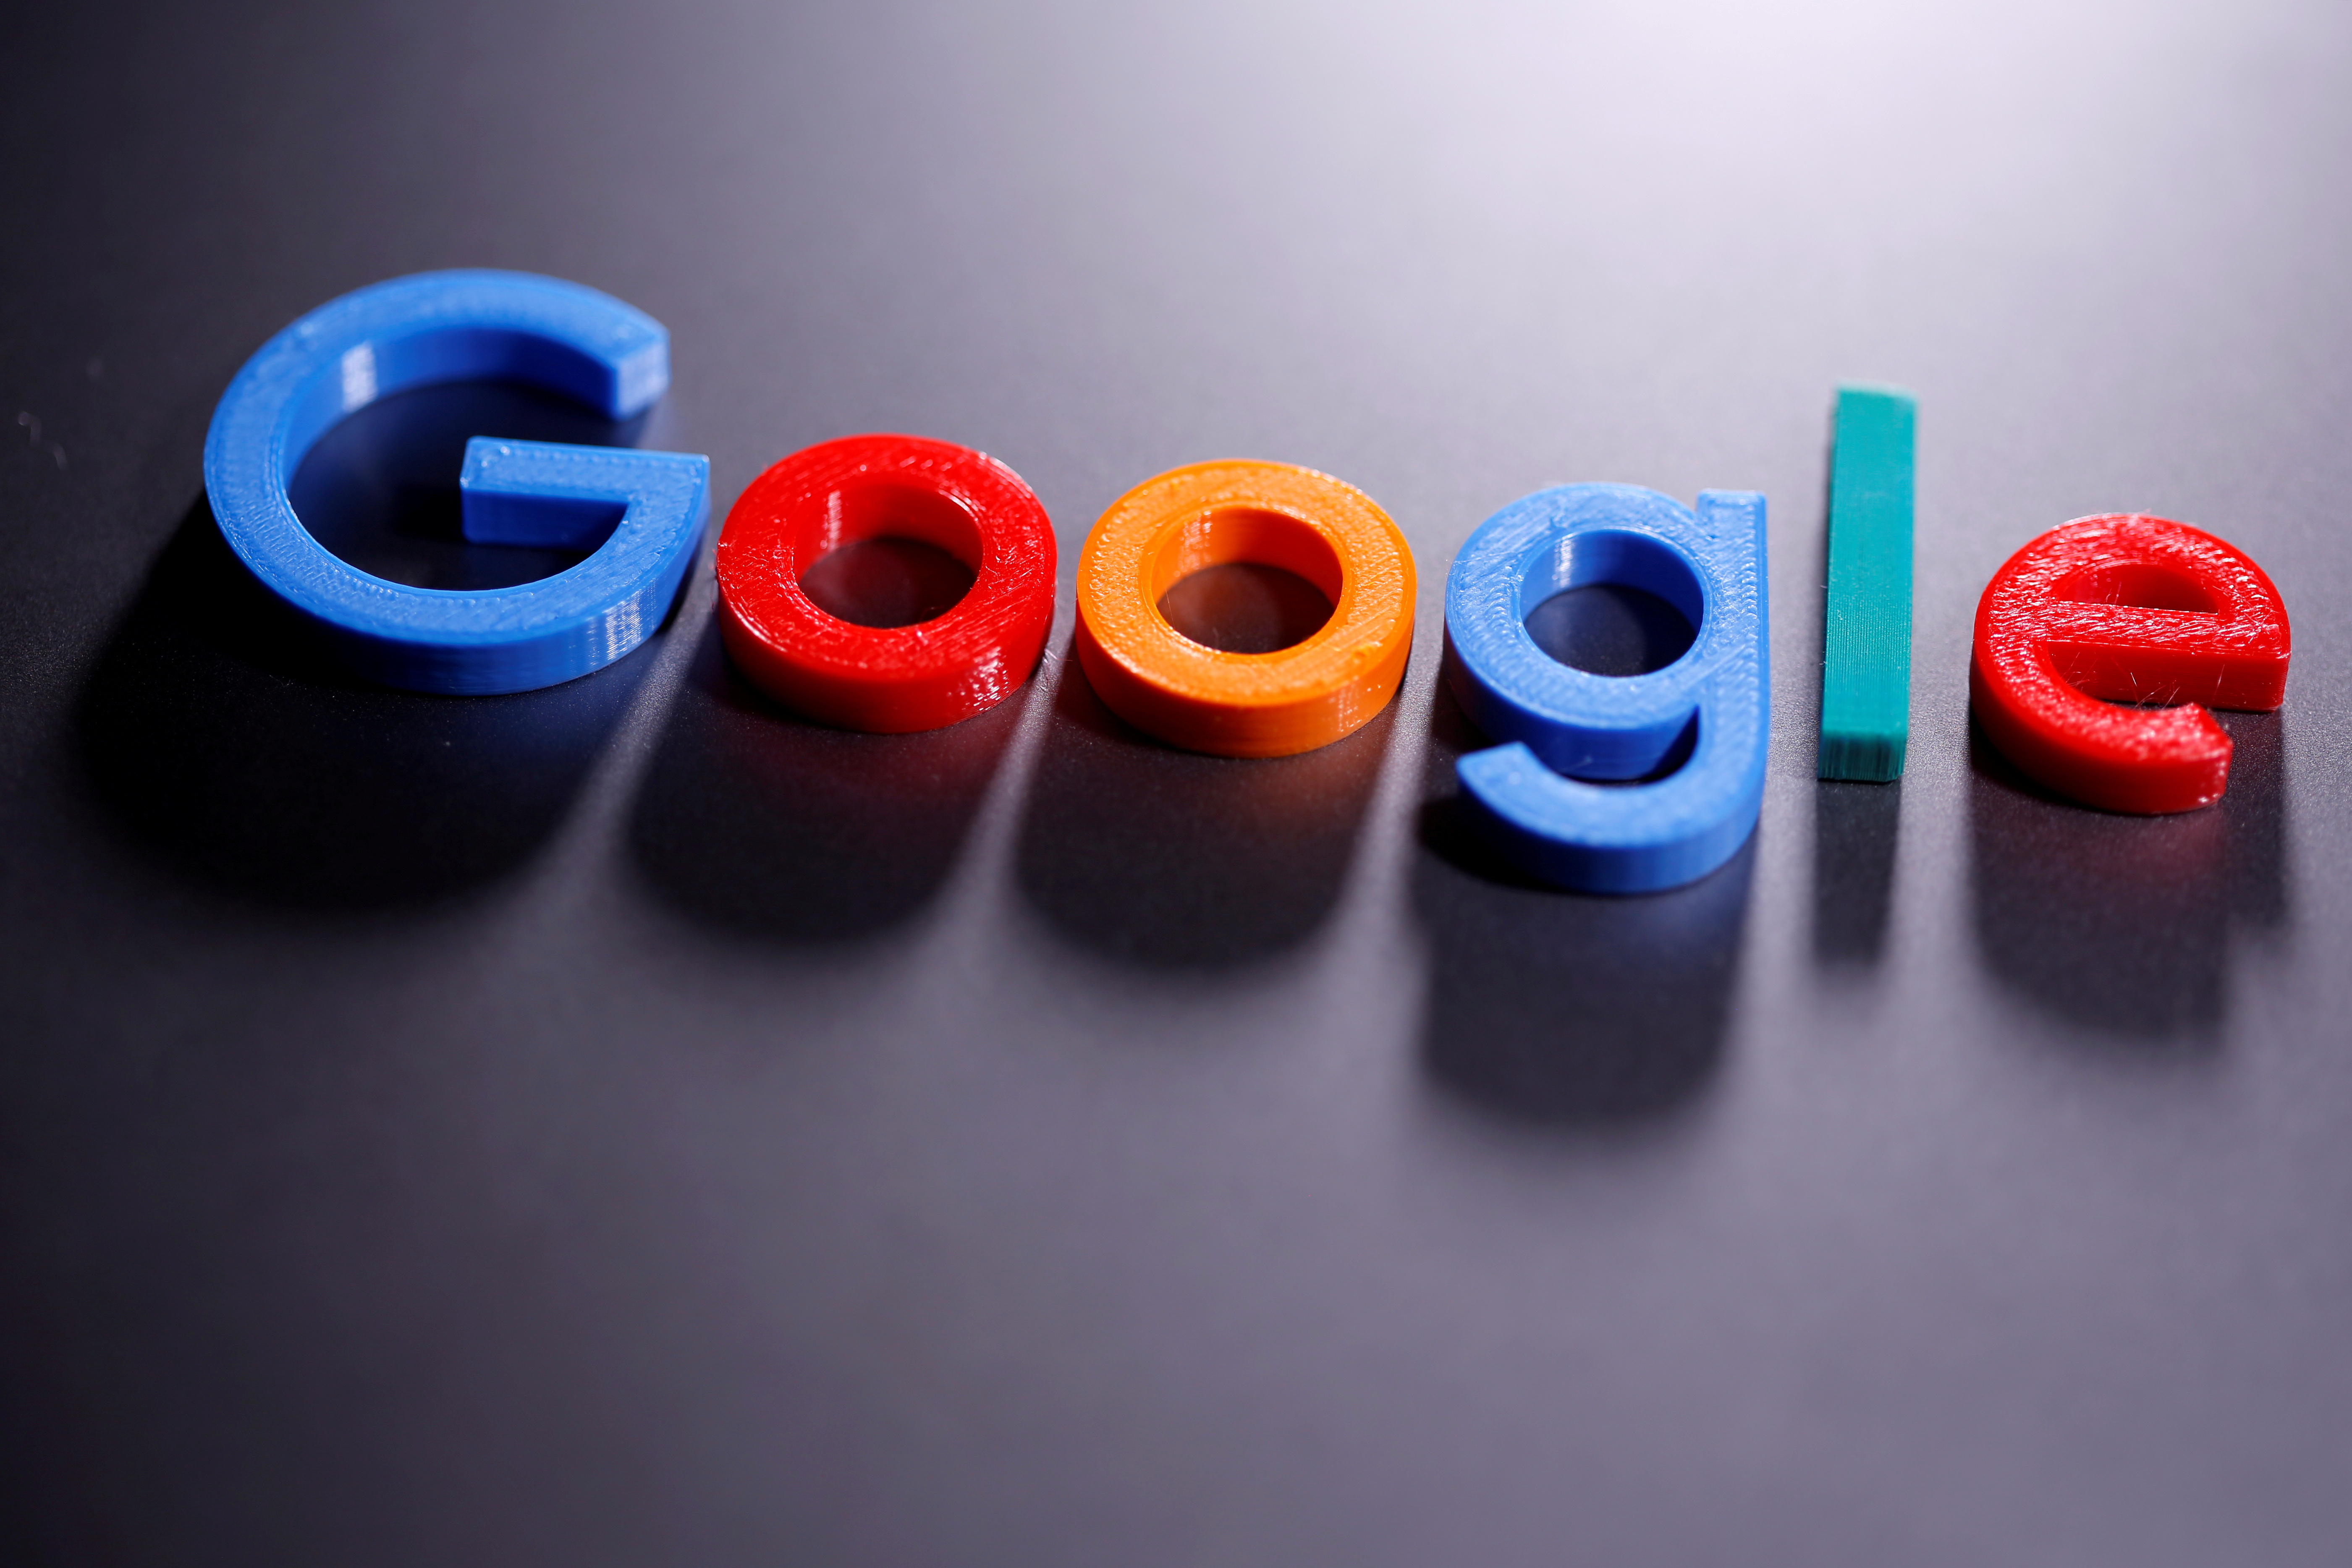 A 3D-printed Google logo is seen in this illustration taken